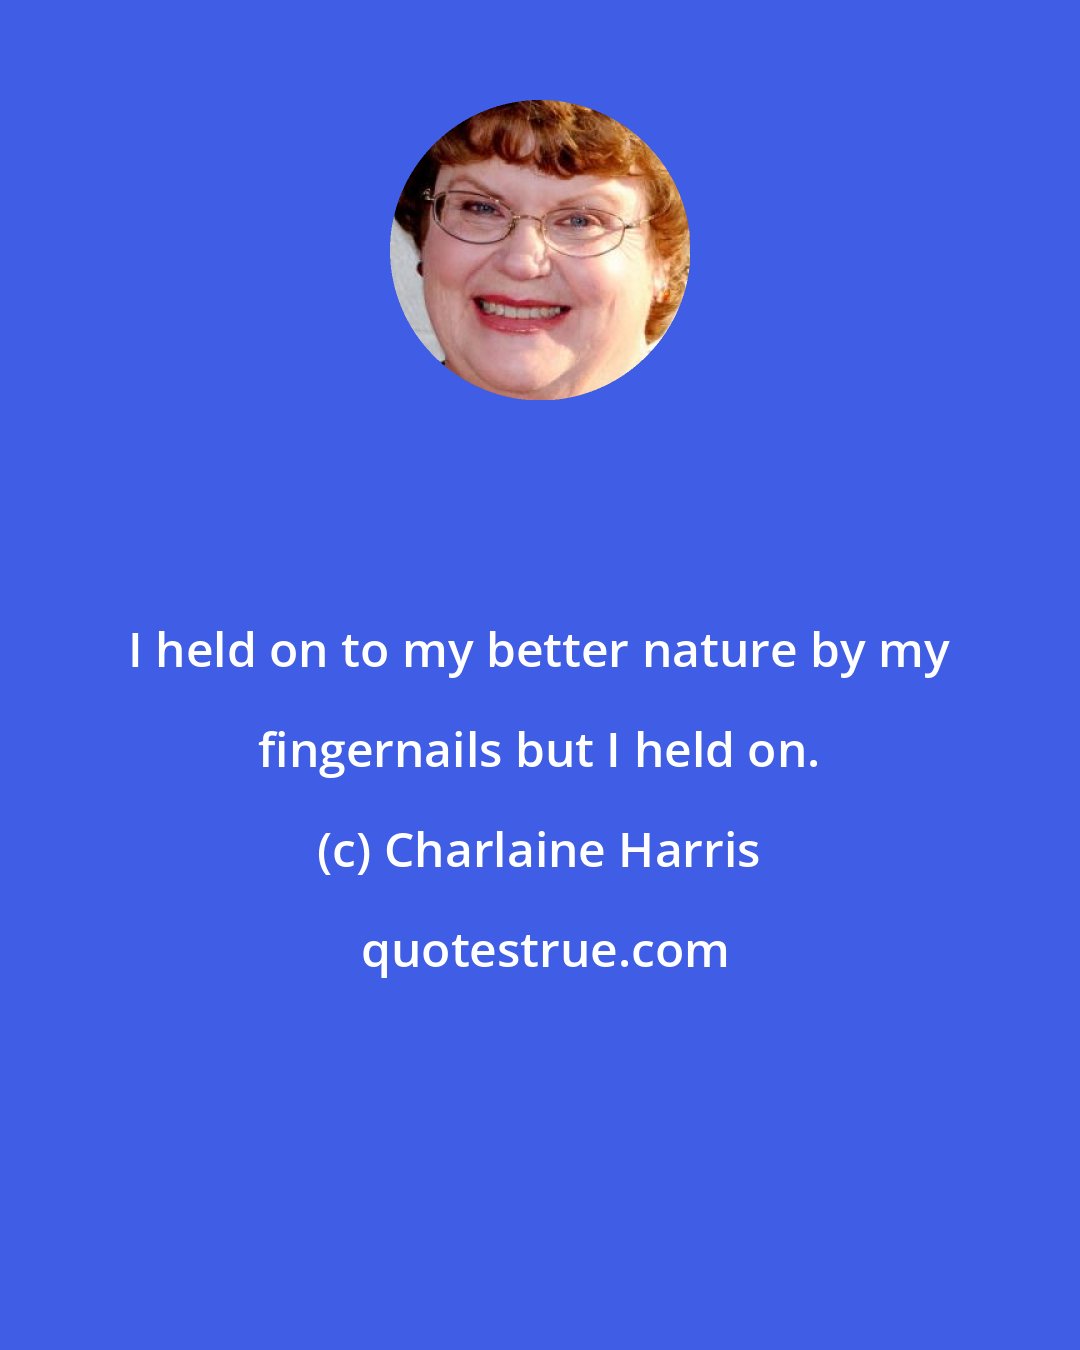 Charlaine Harris: I held on to my better nature by my fingernails but I held on.